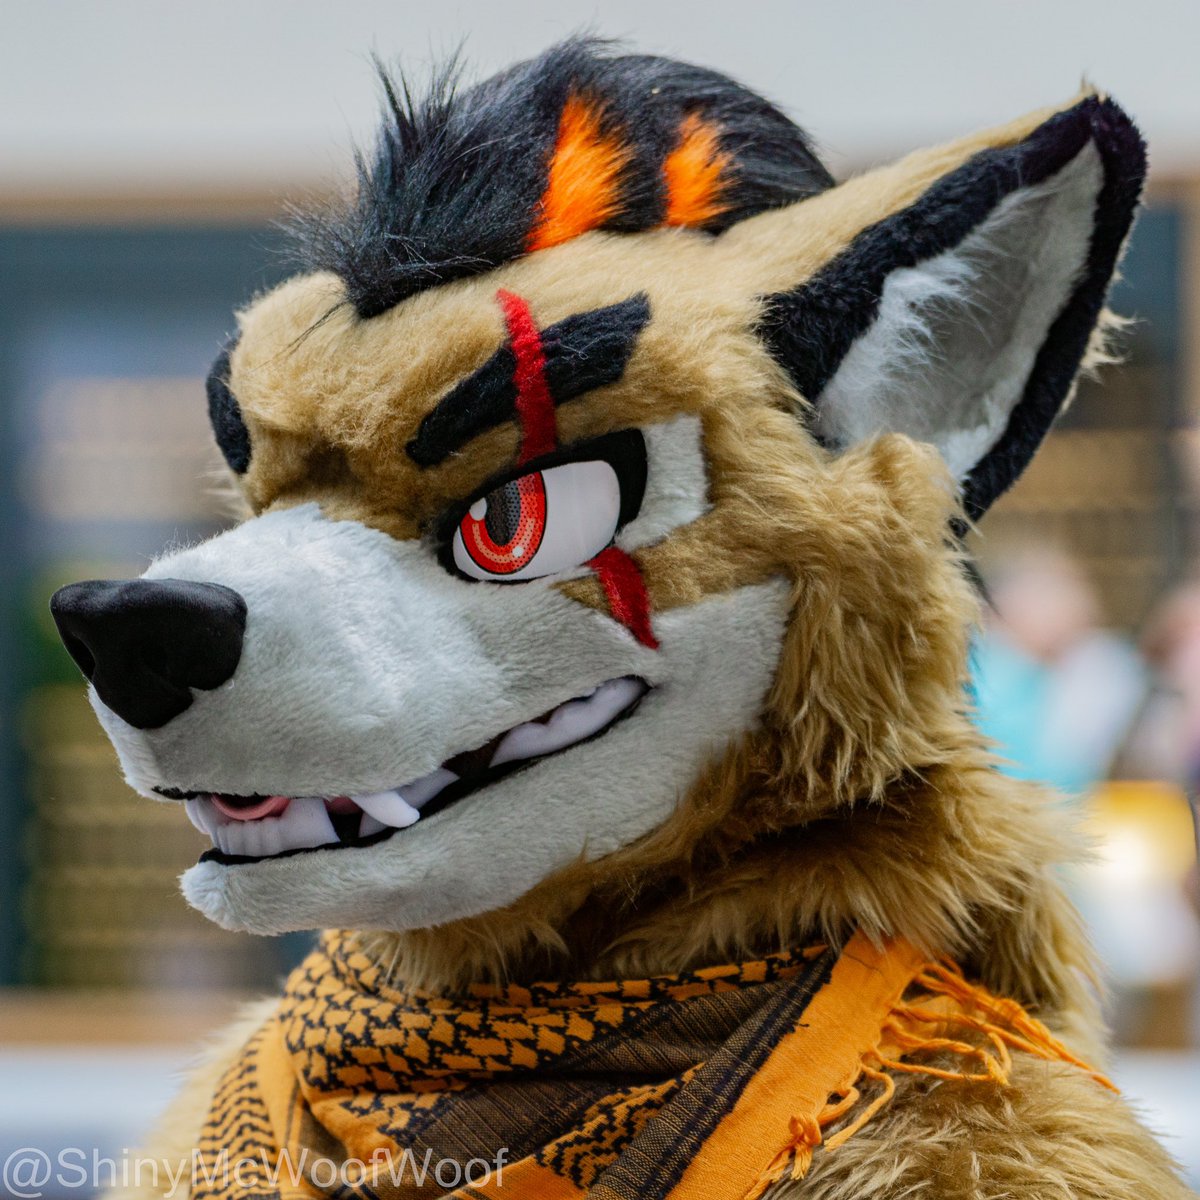 @Raven_the_Husky I have an #Eurofurence26 photo of you! If you want the full quality just hit me up in the dms.